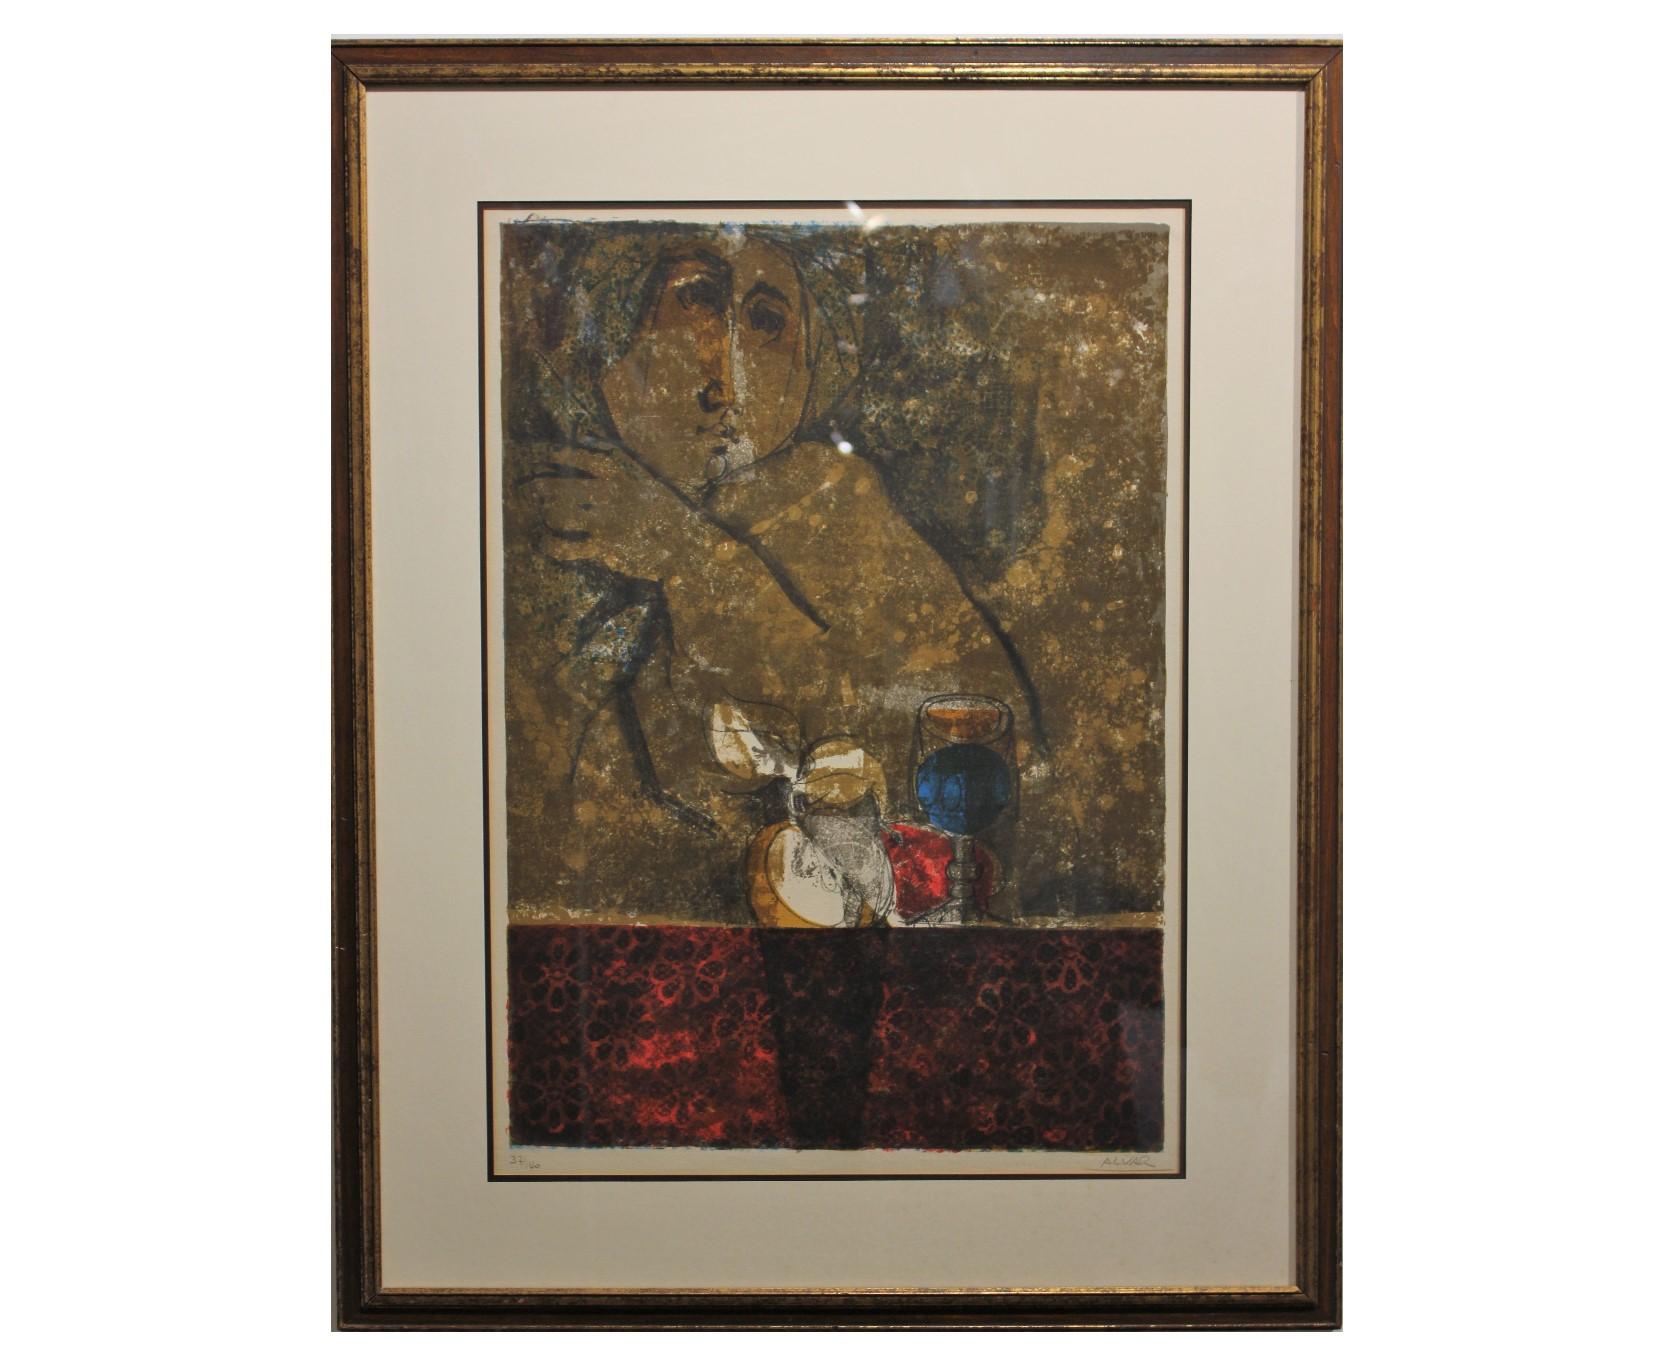 Alvar Sunol Munoz-Ramos Abstract Print - Earth-Toned Abstract Figurative Woman with Drinking Glasses 137/140